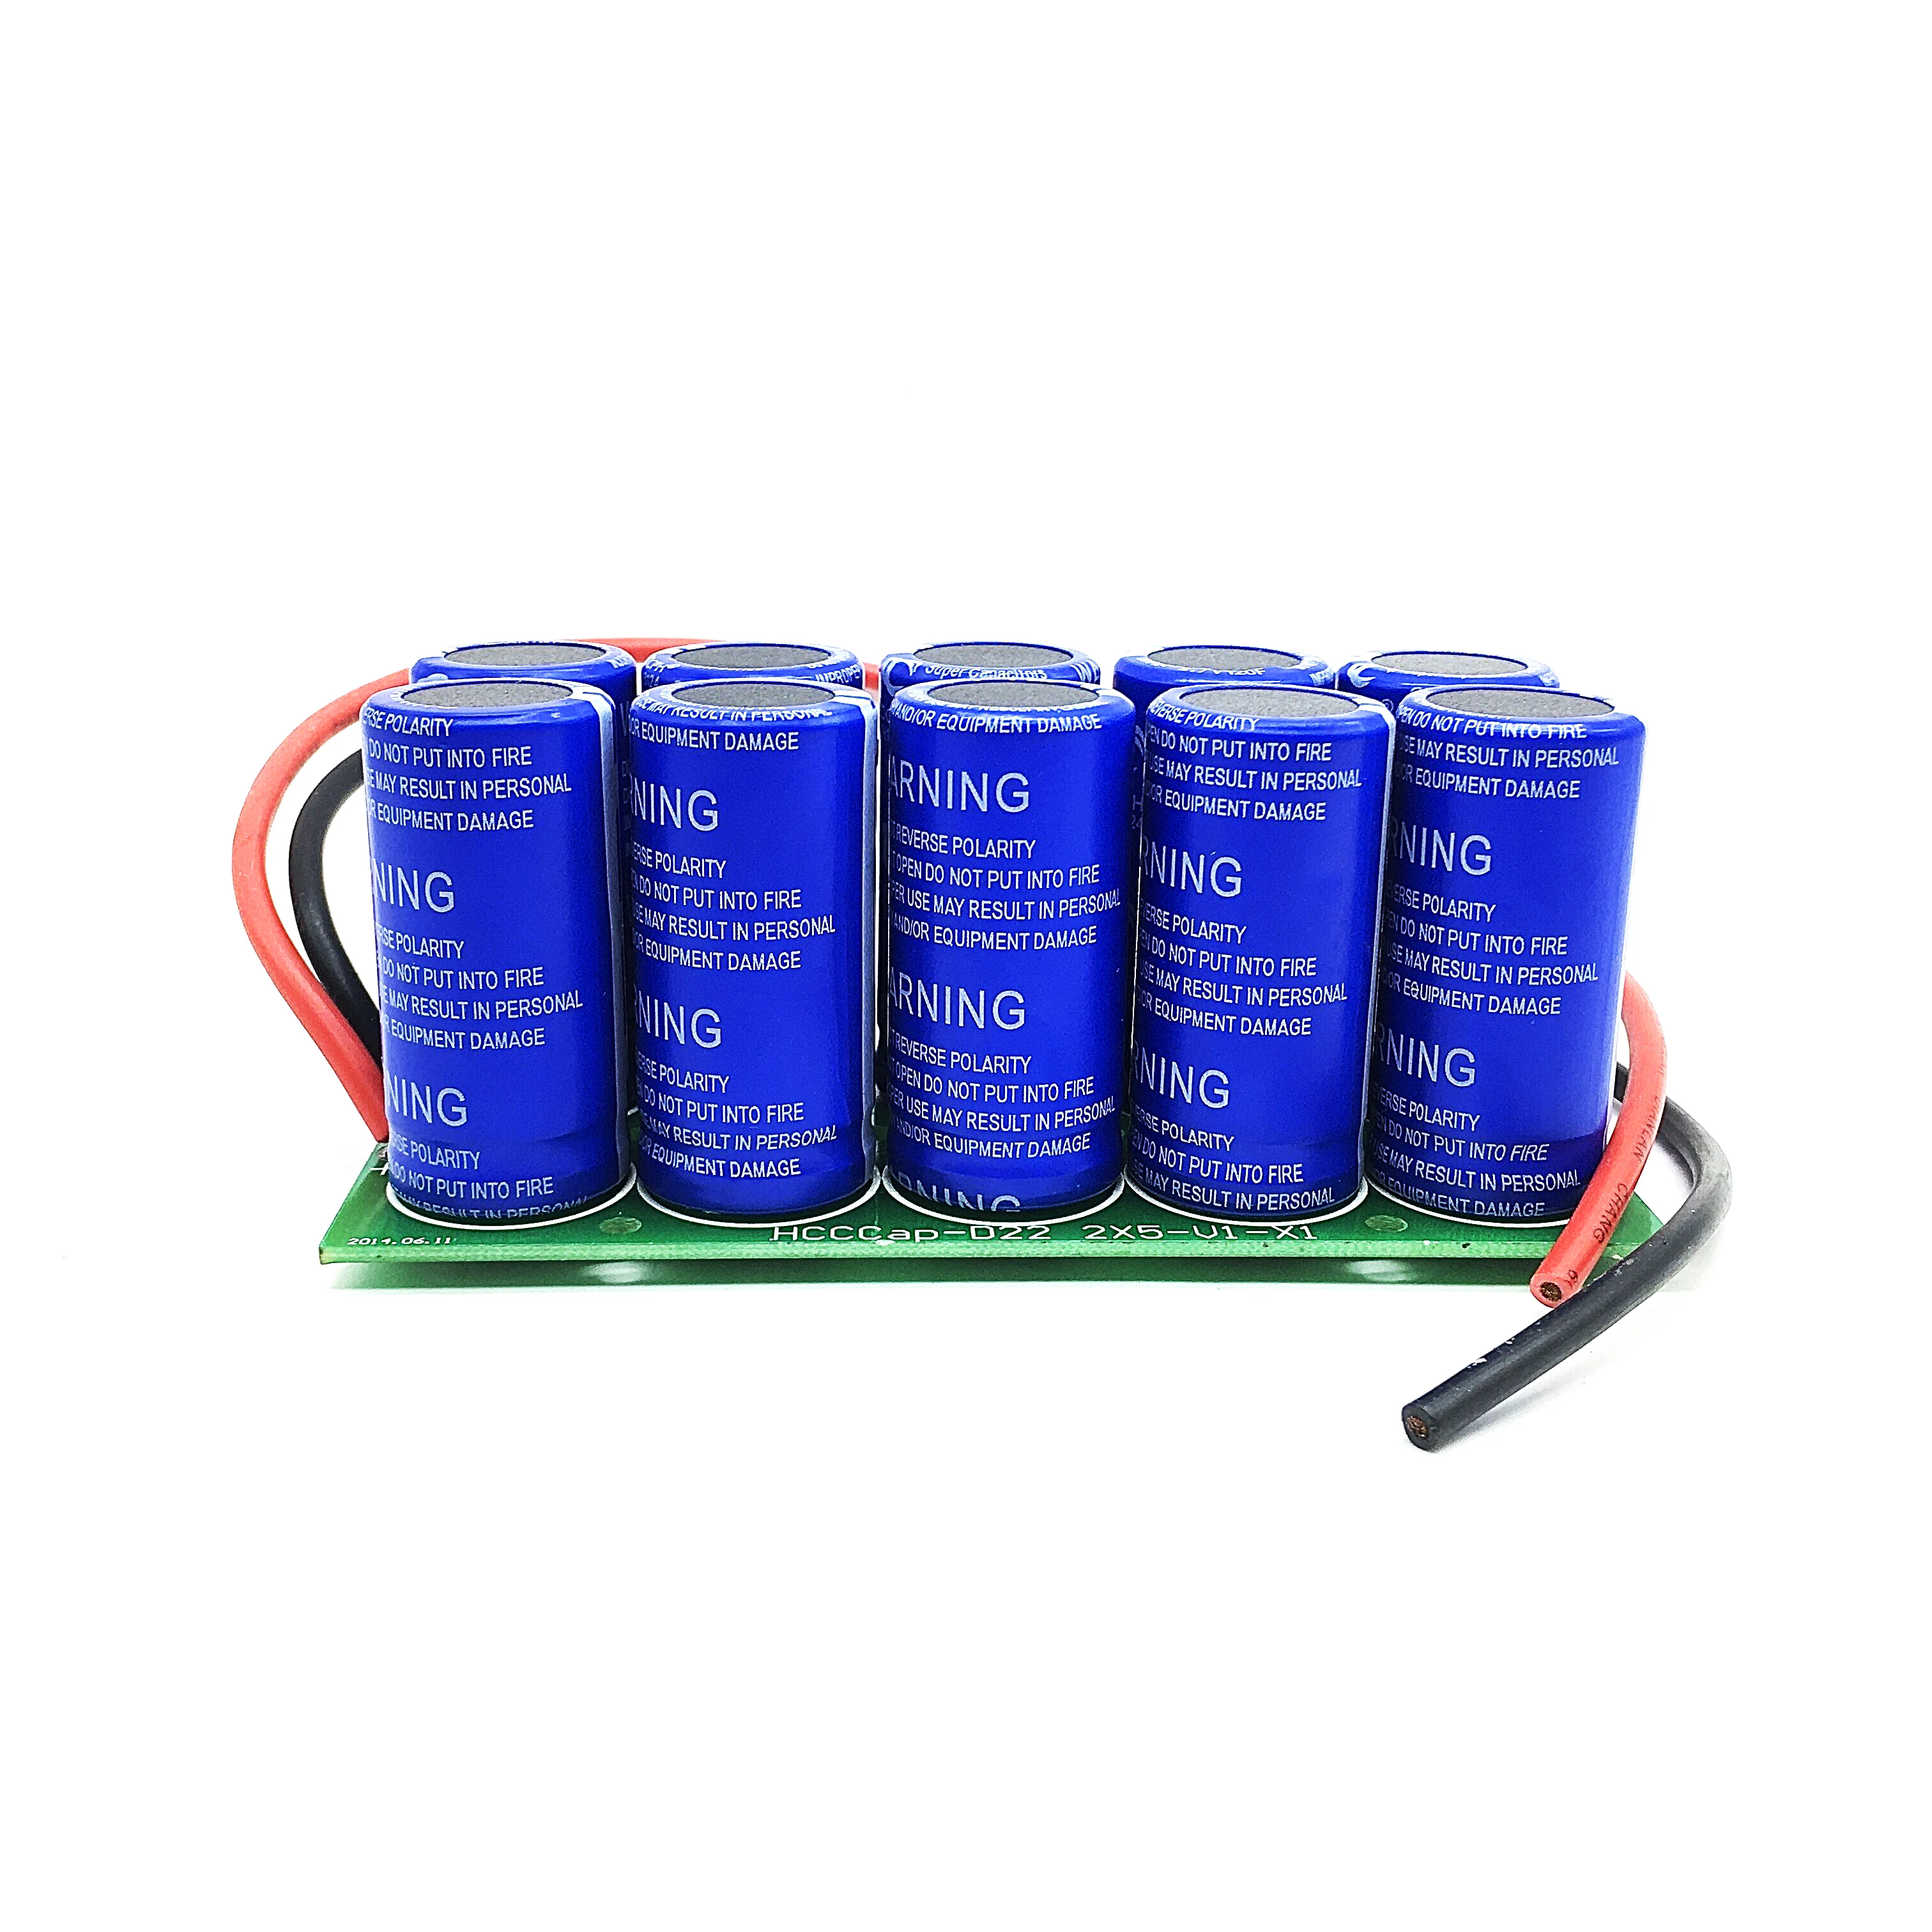 Super Capacitors Farad Capacitor Modules 27V 12F SuperCapacitors With Double Protection Board With Line UltraCapacitor super capacitors farad capacitor modules 27v 12f supercapacitors with double protection board with line ultracapacitor